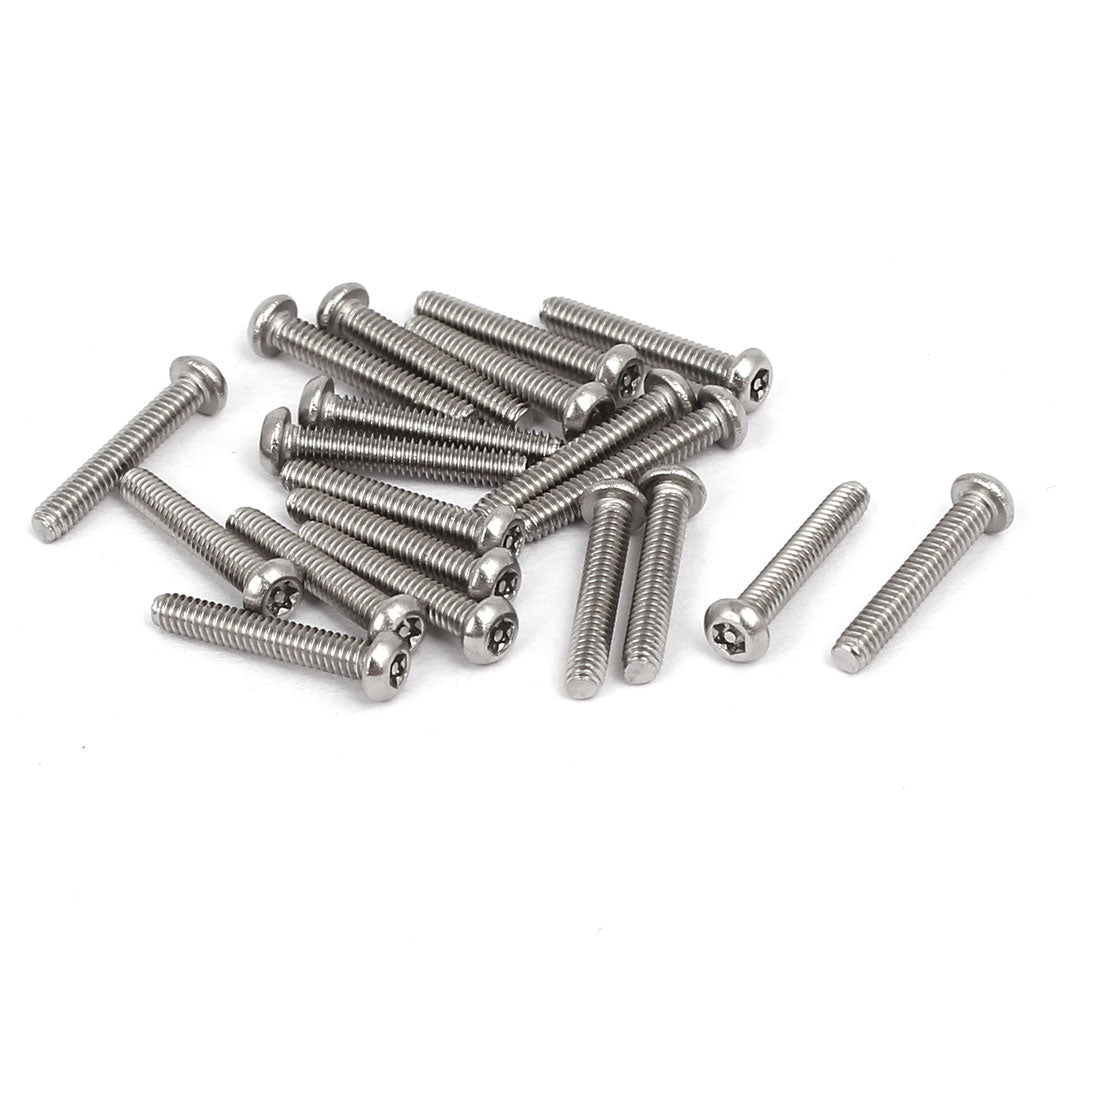 uxcell Uxcell M2x12mm 304 Stainless Steel Button Head Torx Security Machine Screws 20pcs